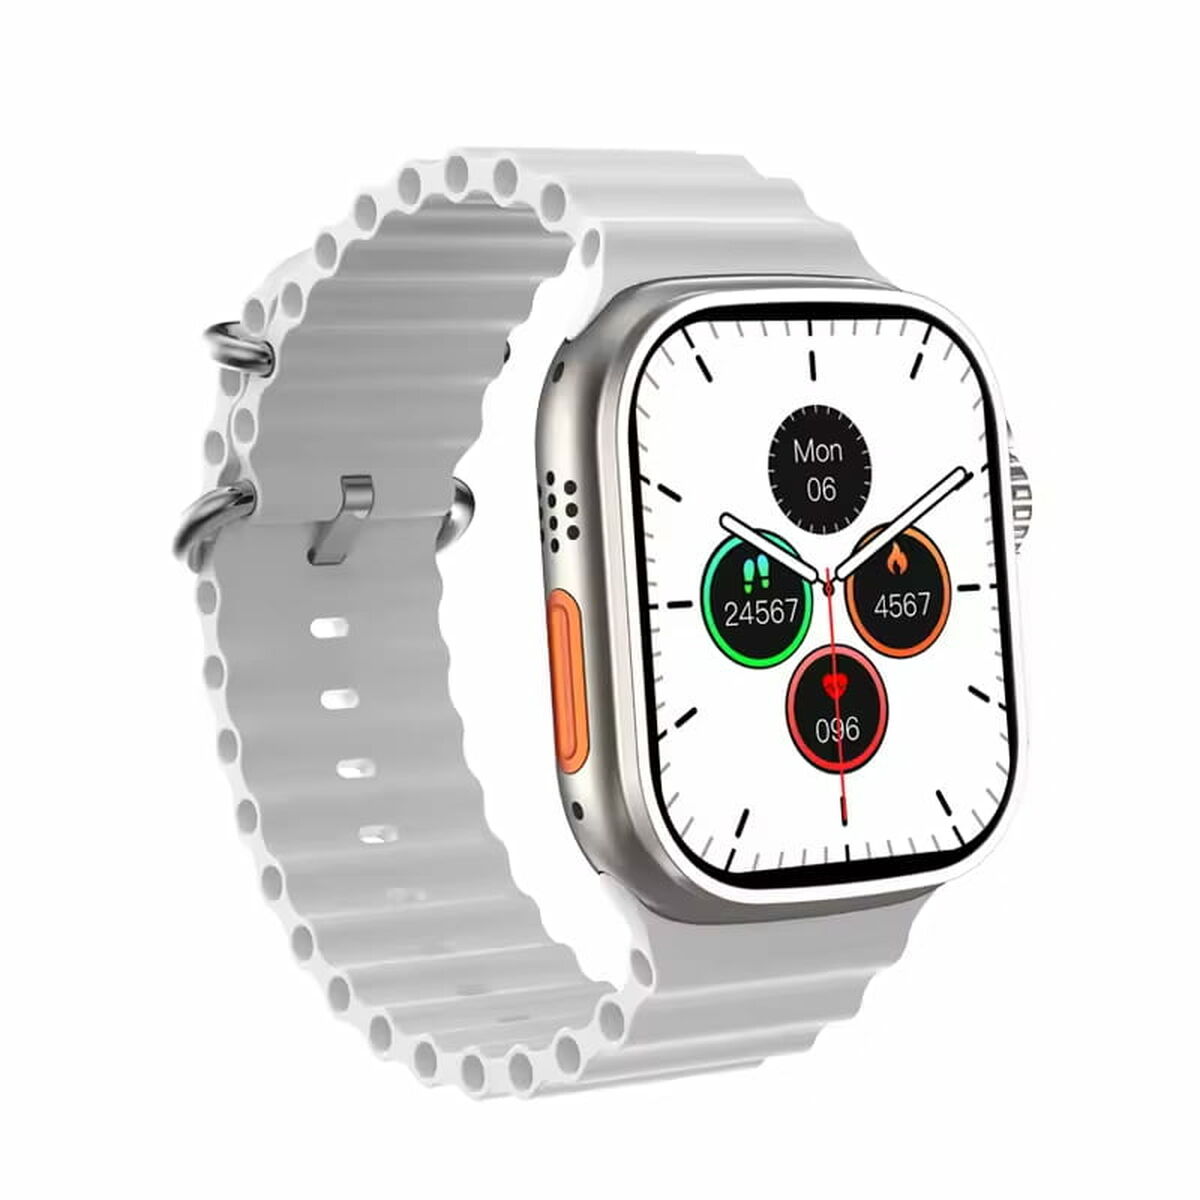 Smartwatch HiWatch Ultra BIG-2-3-WHT, HiWatch Ultra, Watches, Men, smartwatch-hiwatch-ultra-big-2-3-wht, Brand_HiWatch Ultra, category-reference-2609, category-reference-2617, category-reference-2634, category-reference-t-19667, category-reference-t-19724, category-reference-t-20348, Condition_NEW, original gifts, Price_50 - 100, telephones & tablets, wifi y bluetooth, RiotNook